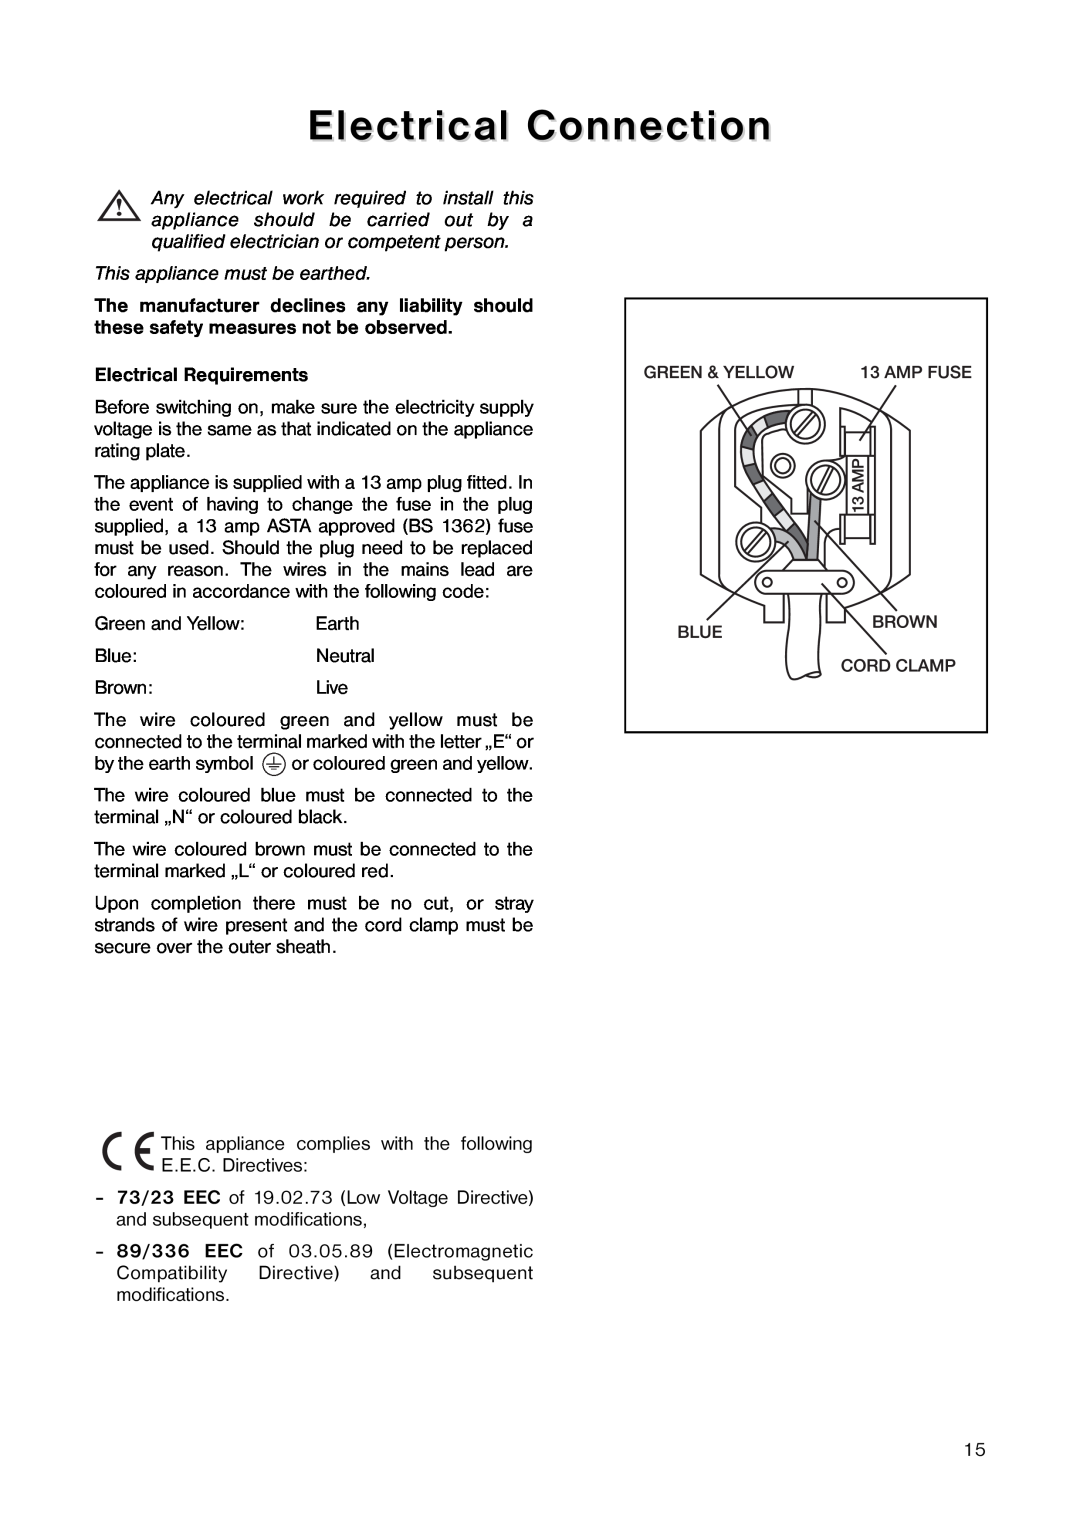 Kelvinator ER 1642 T manual Electrical Connection, This appliance must be earthed, Electrical Requirements 